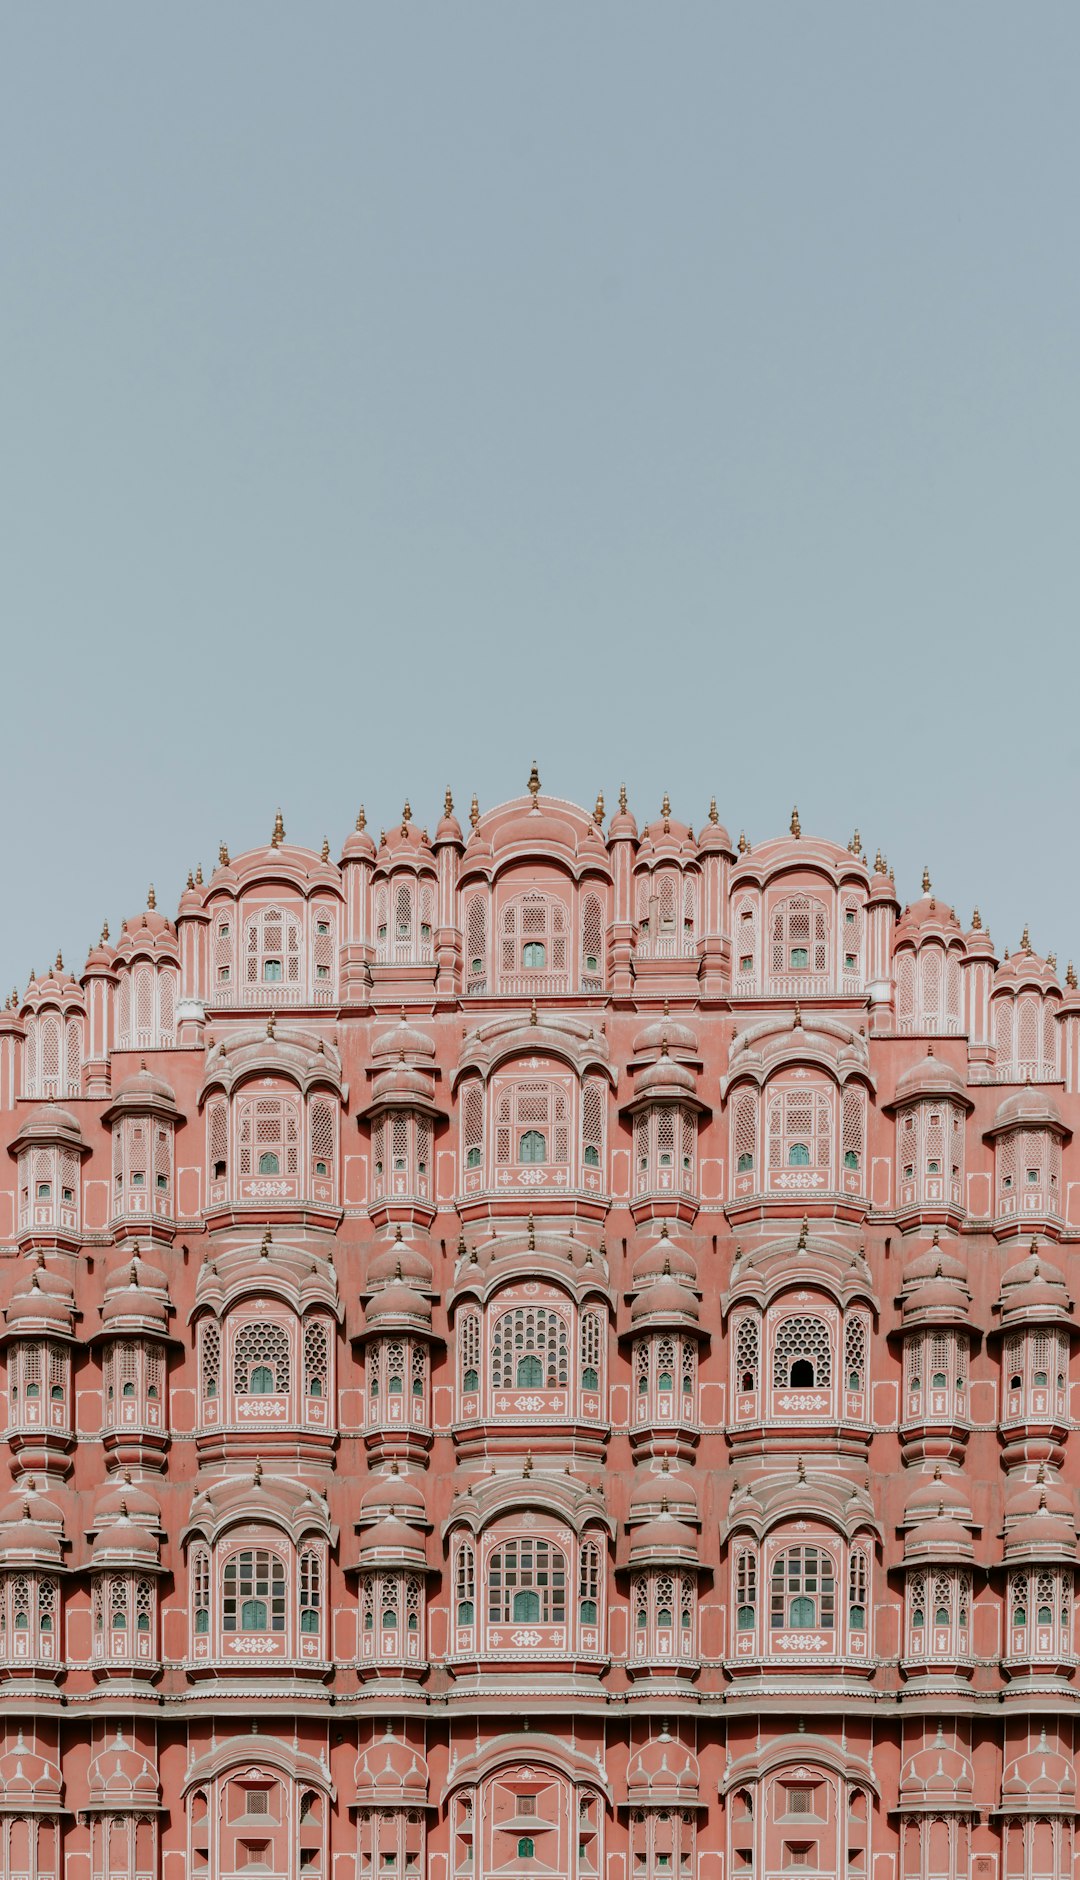 Travel Tips and Stories of Hawa Mahal in India